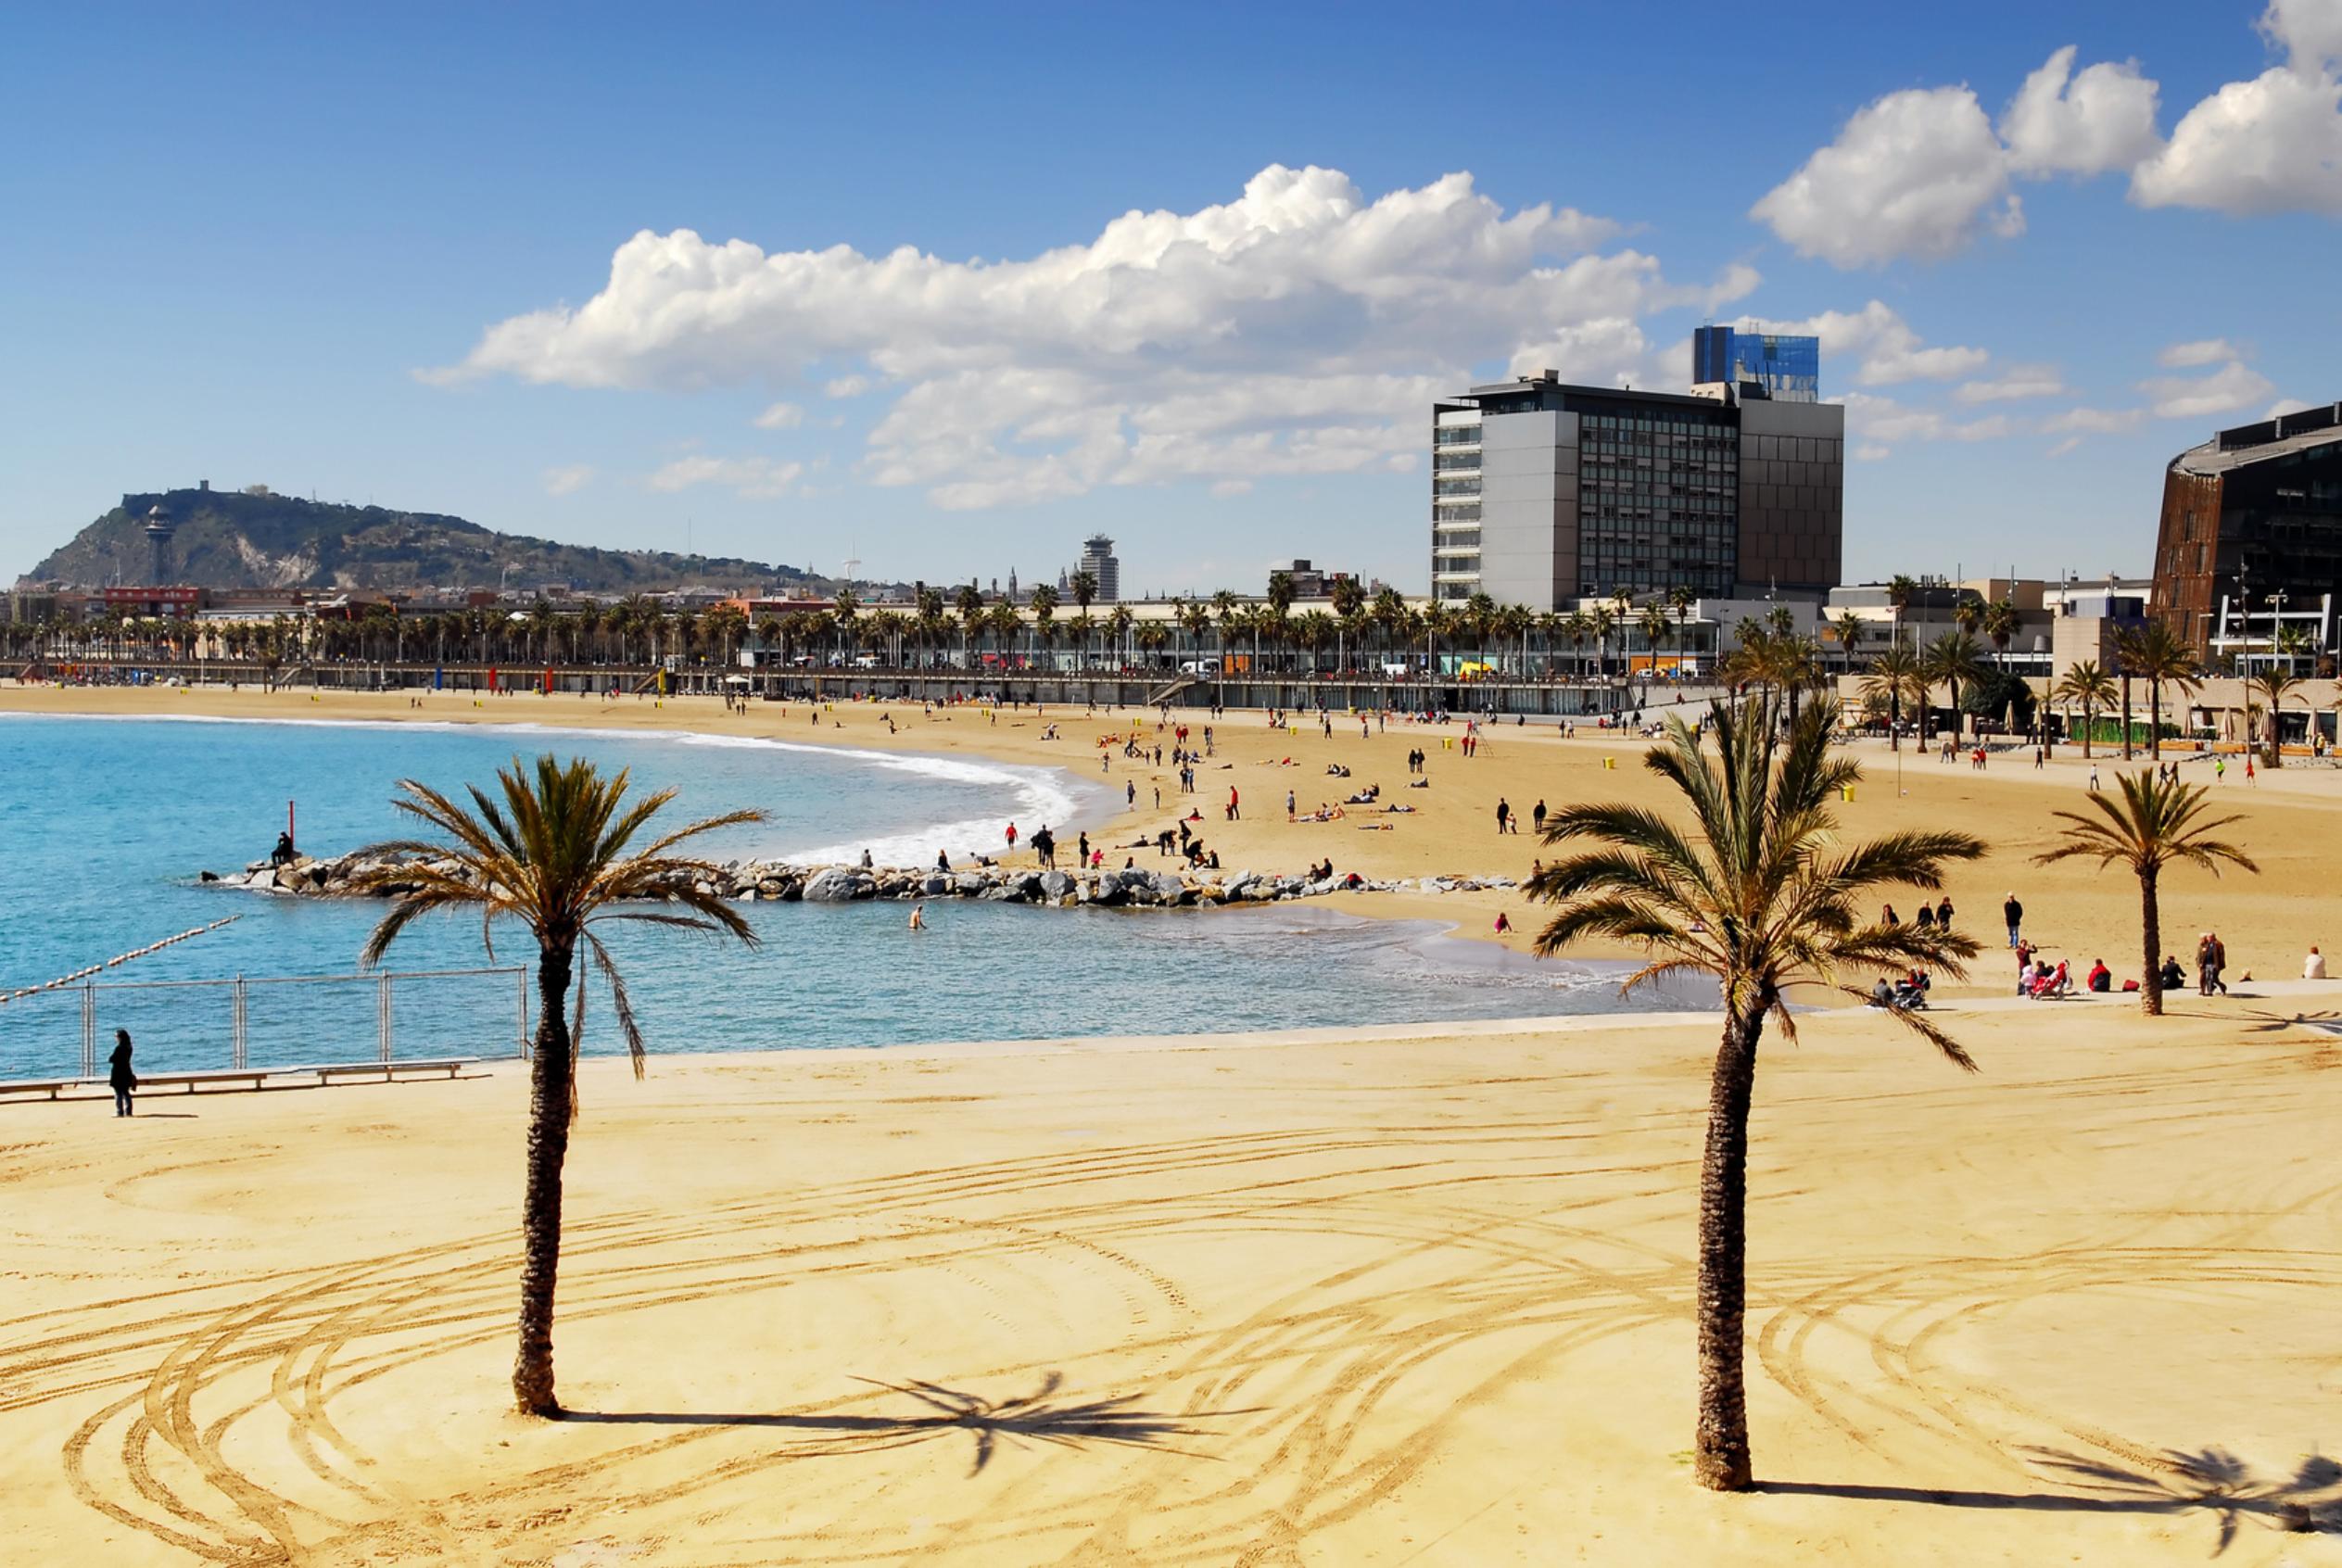 The best of Barcelona: visit by bus and on foot - optional cooking class and paella tasting